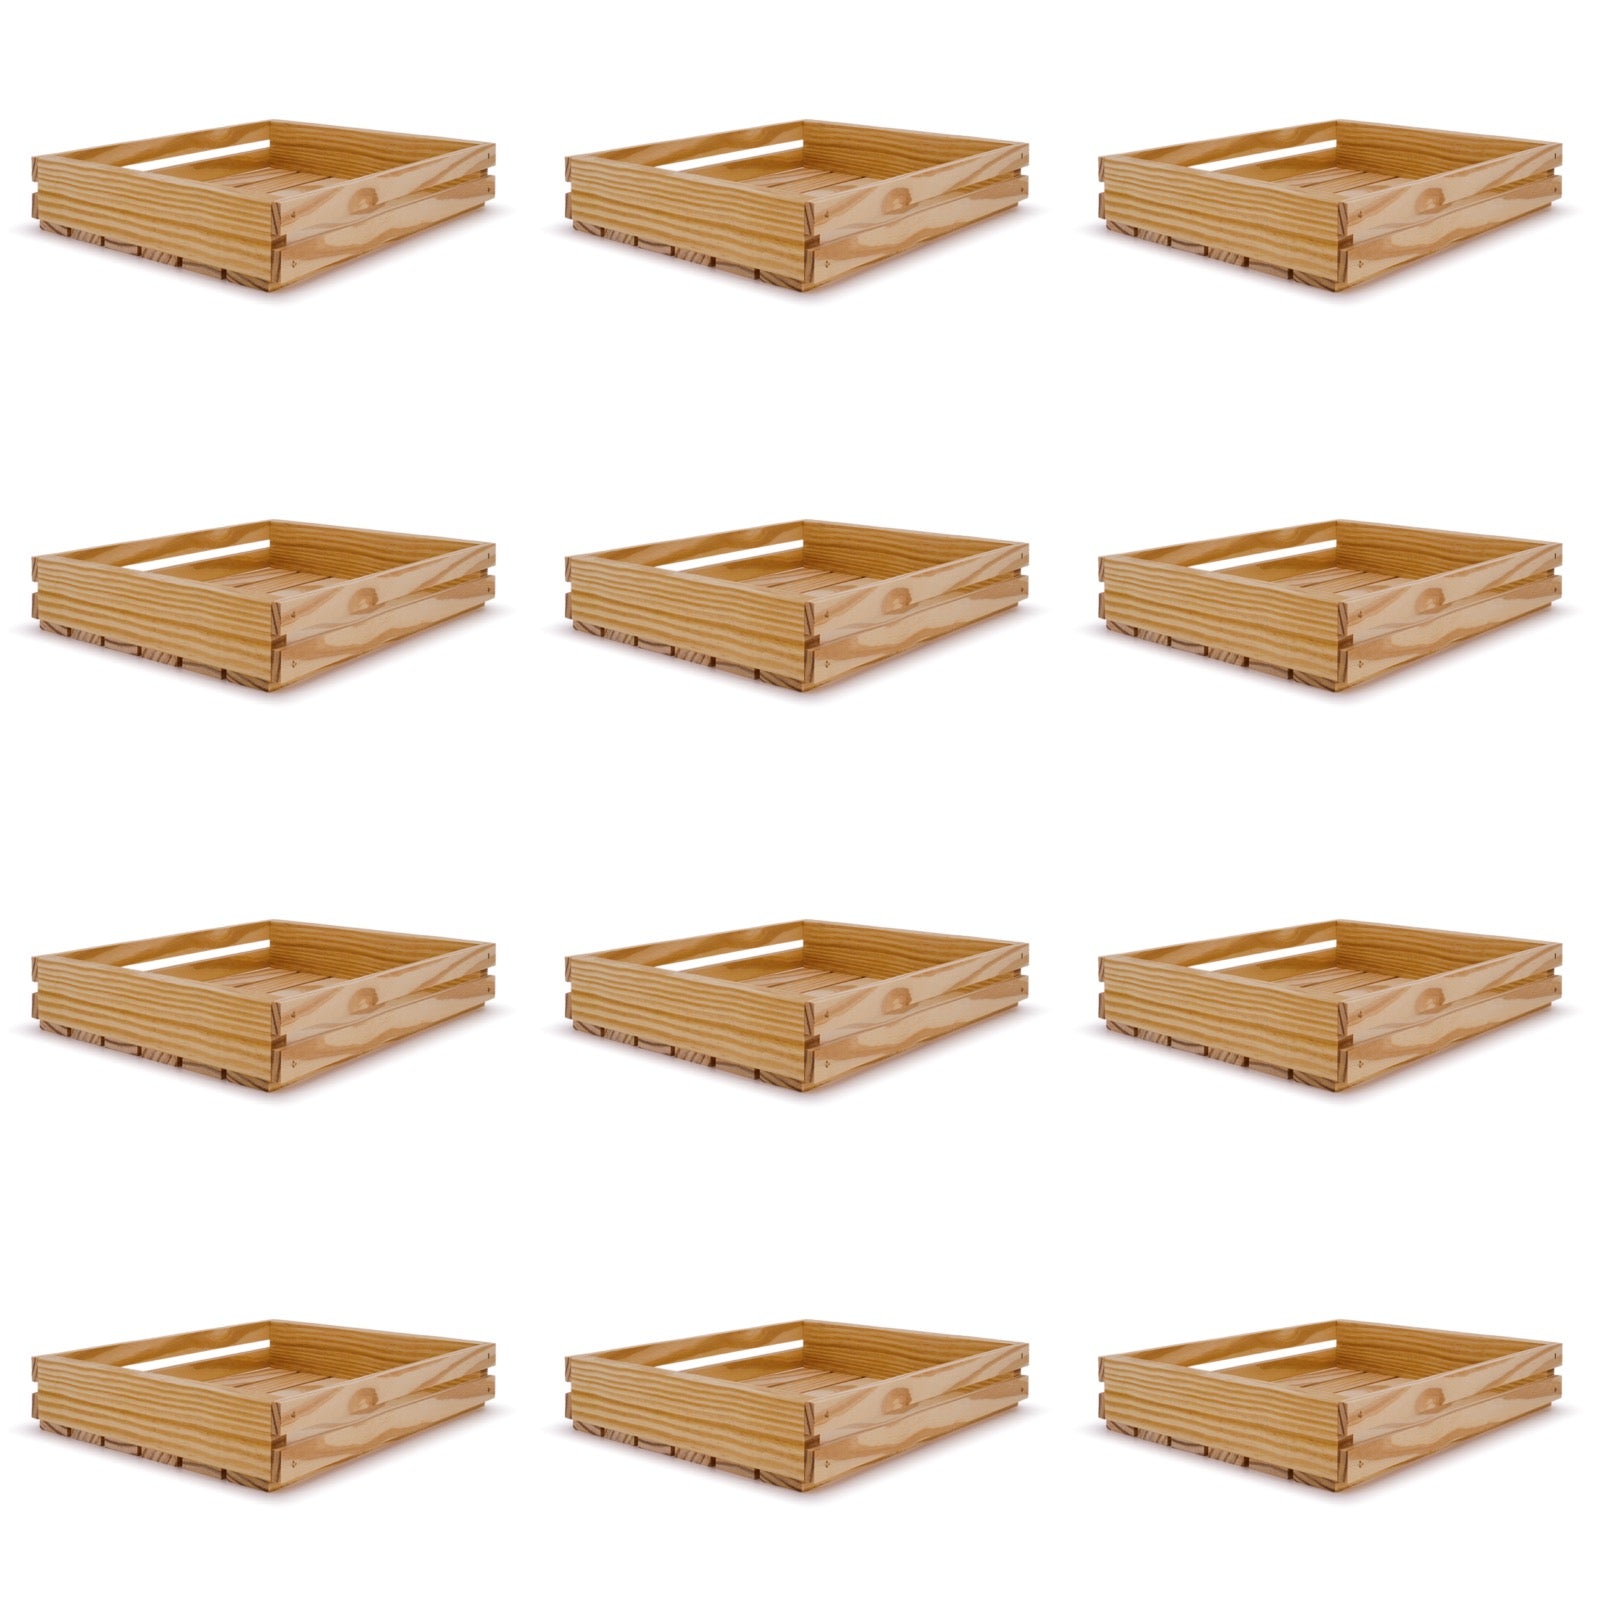 12 Small wooden crates 14x12x2.5